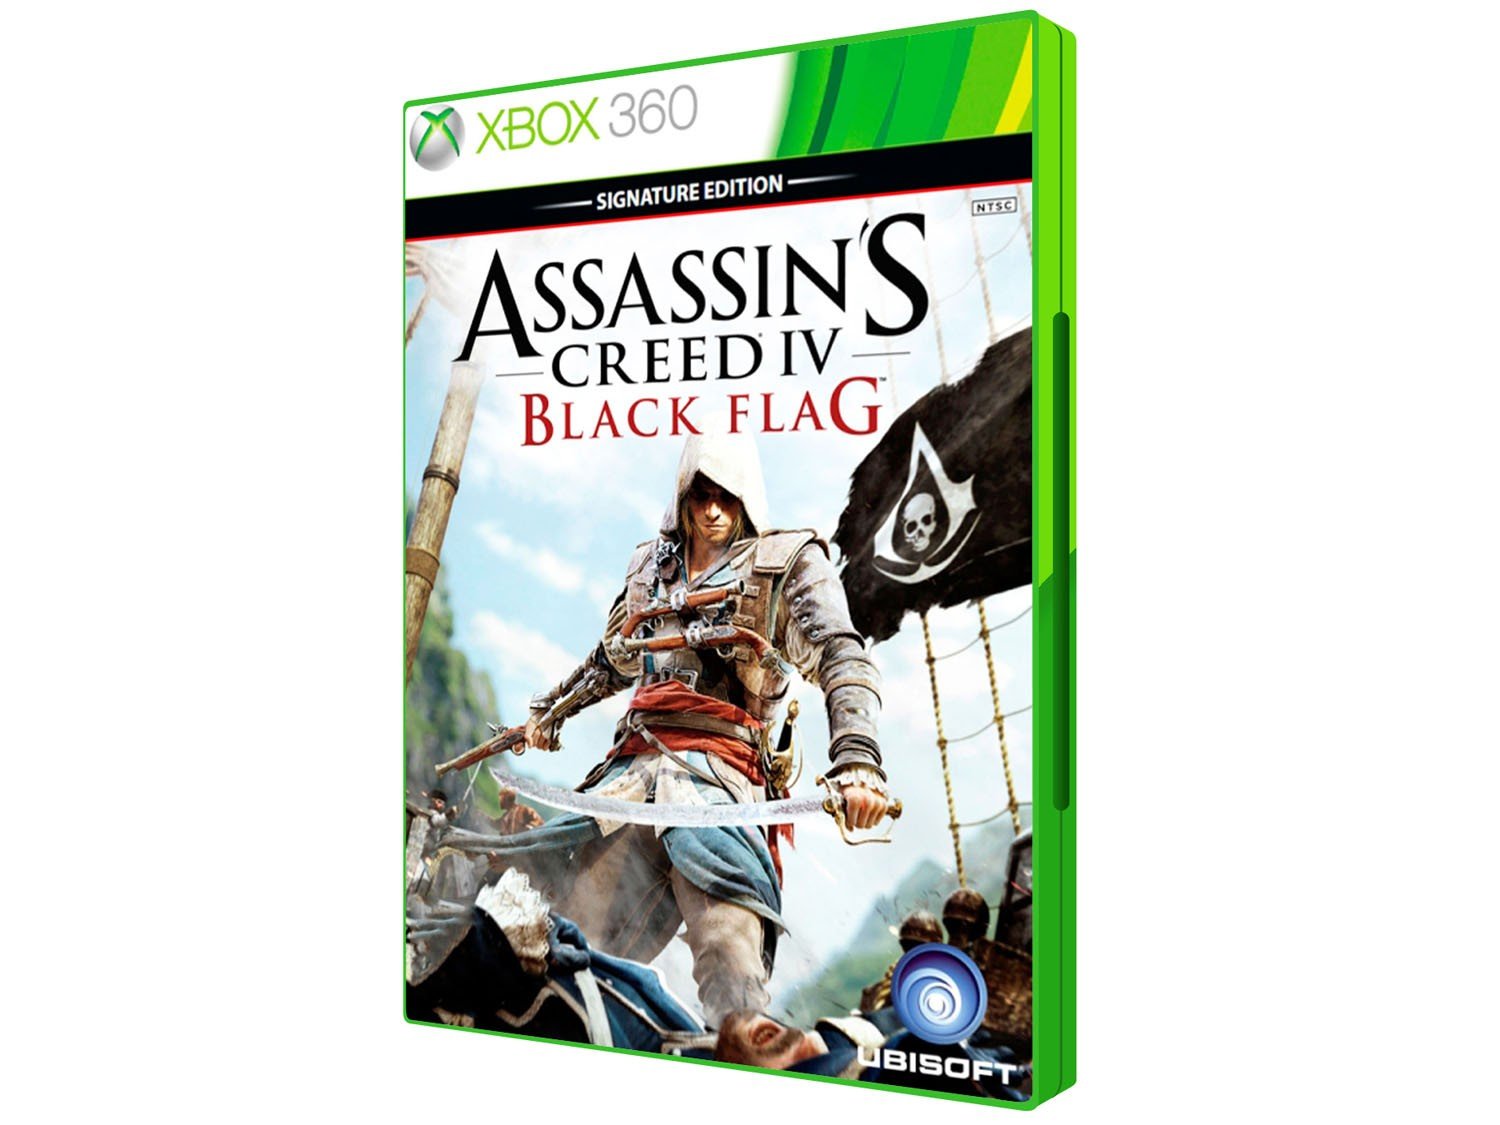 Assassin s xbox 360. Assassin's Creed Xbox 360 диск. Диск ассасин Крид 4 на хбокс 360. Assassin's Creed 4 диски Xbox 360. Assassin's Creed Black Flag Xbox 360.